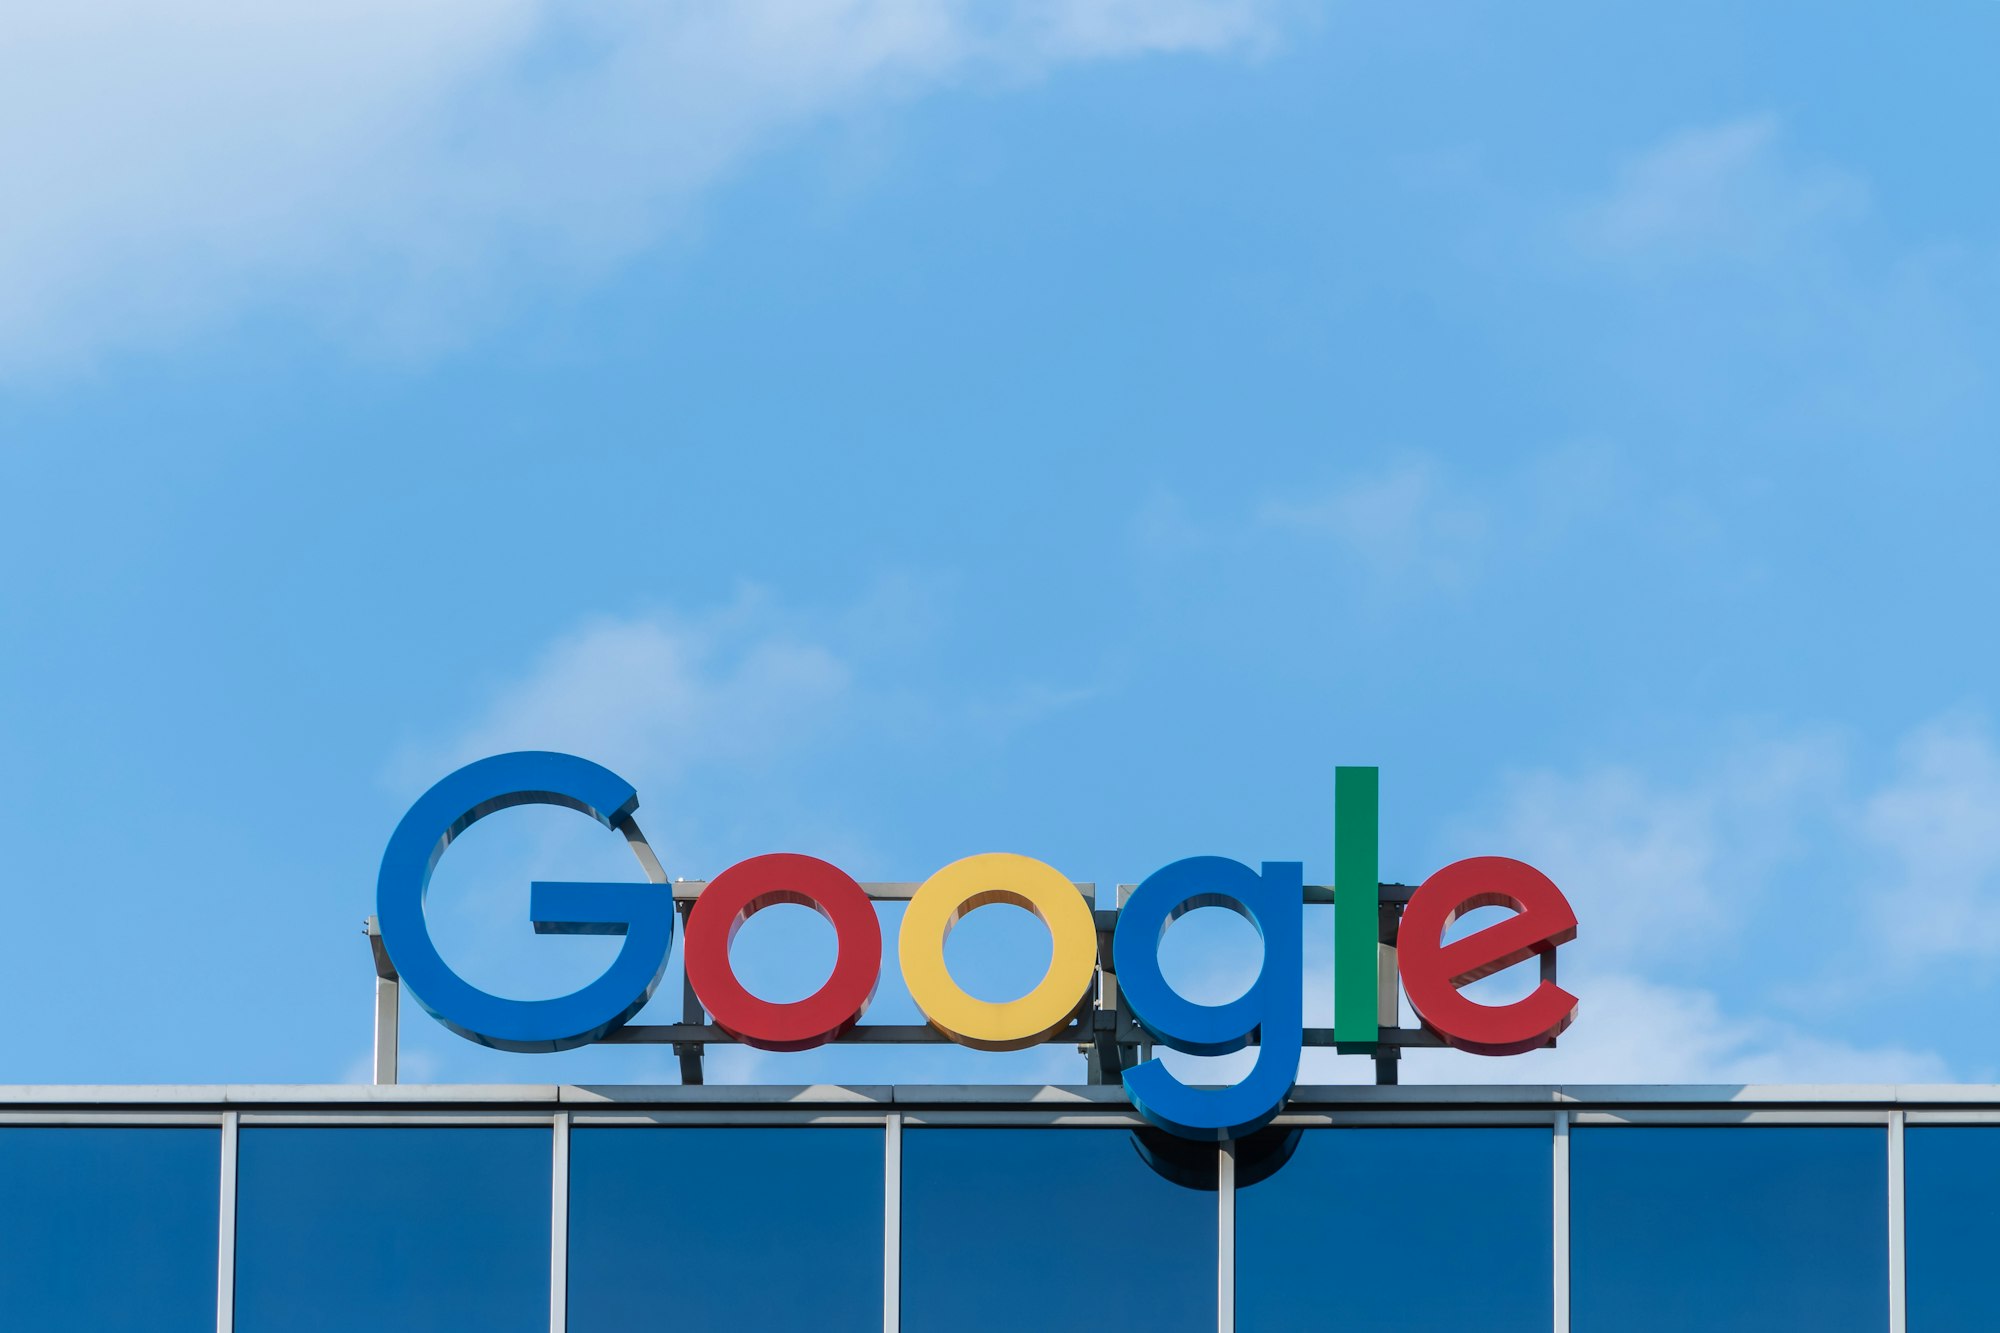 Google Black Founders Fund for Africa selects 23 Nigerian startups for its second cohort